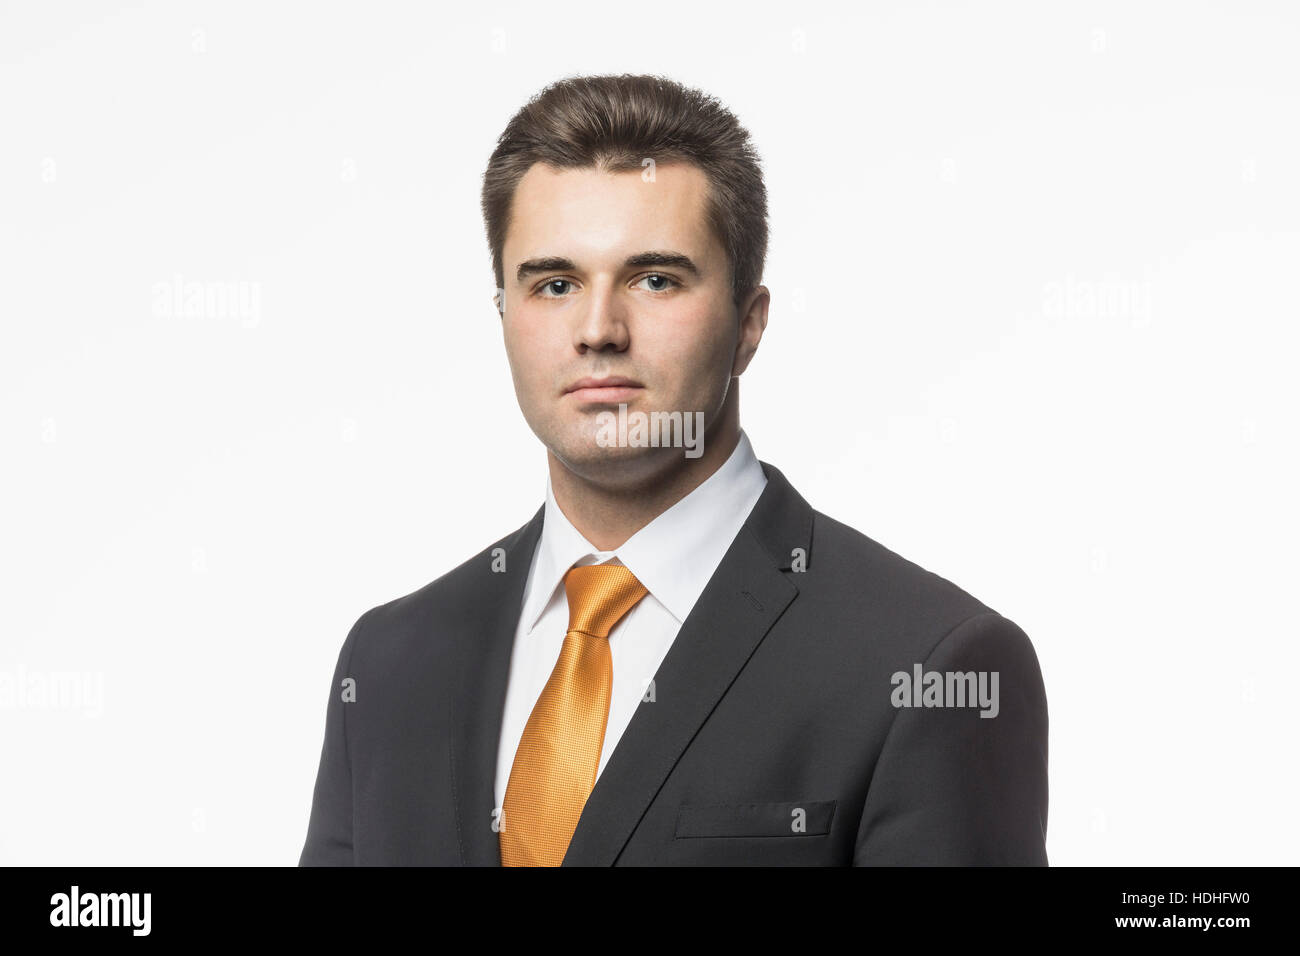 Portrait of well-dressed businessman against white background Stock Photo